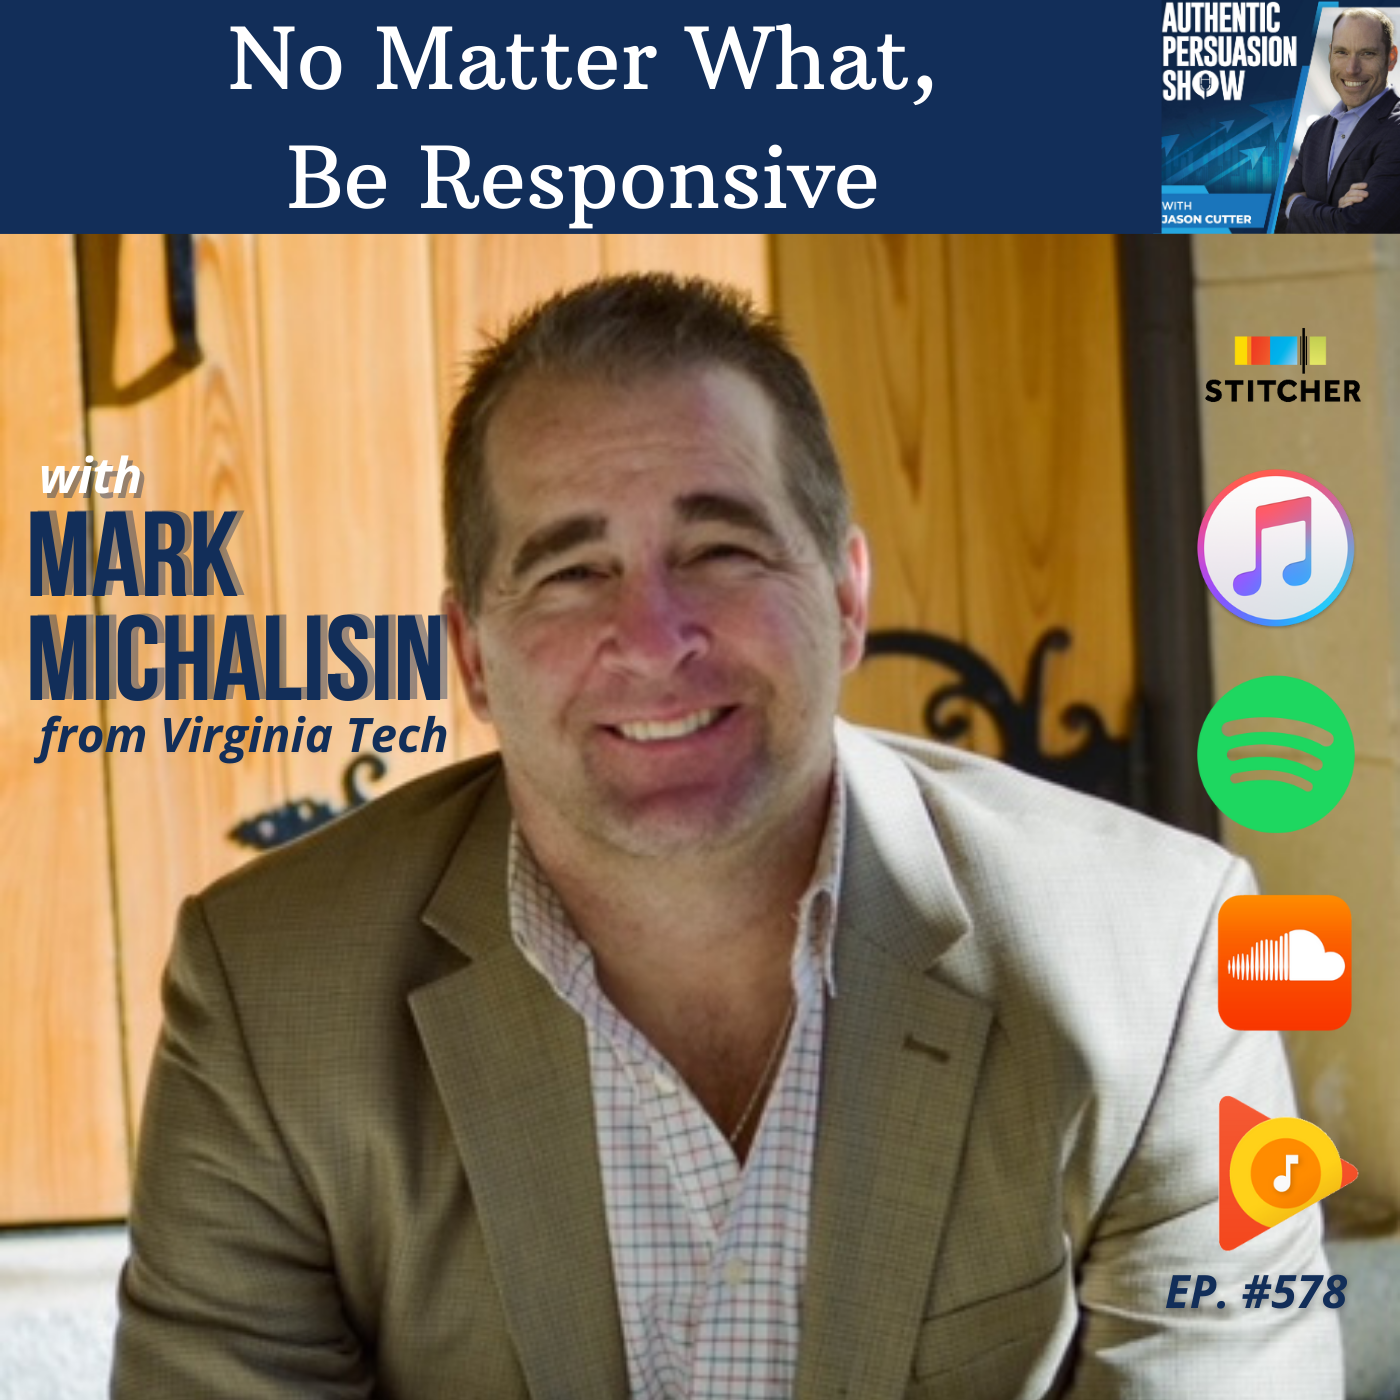 [573] No Matter What, Be Responsive, with Mark Michalisin from Virginia Tech